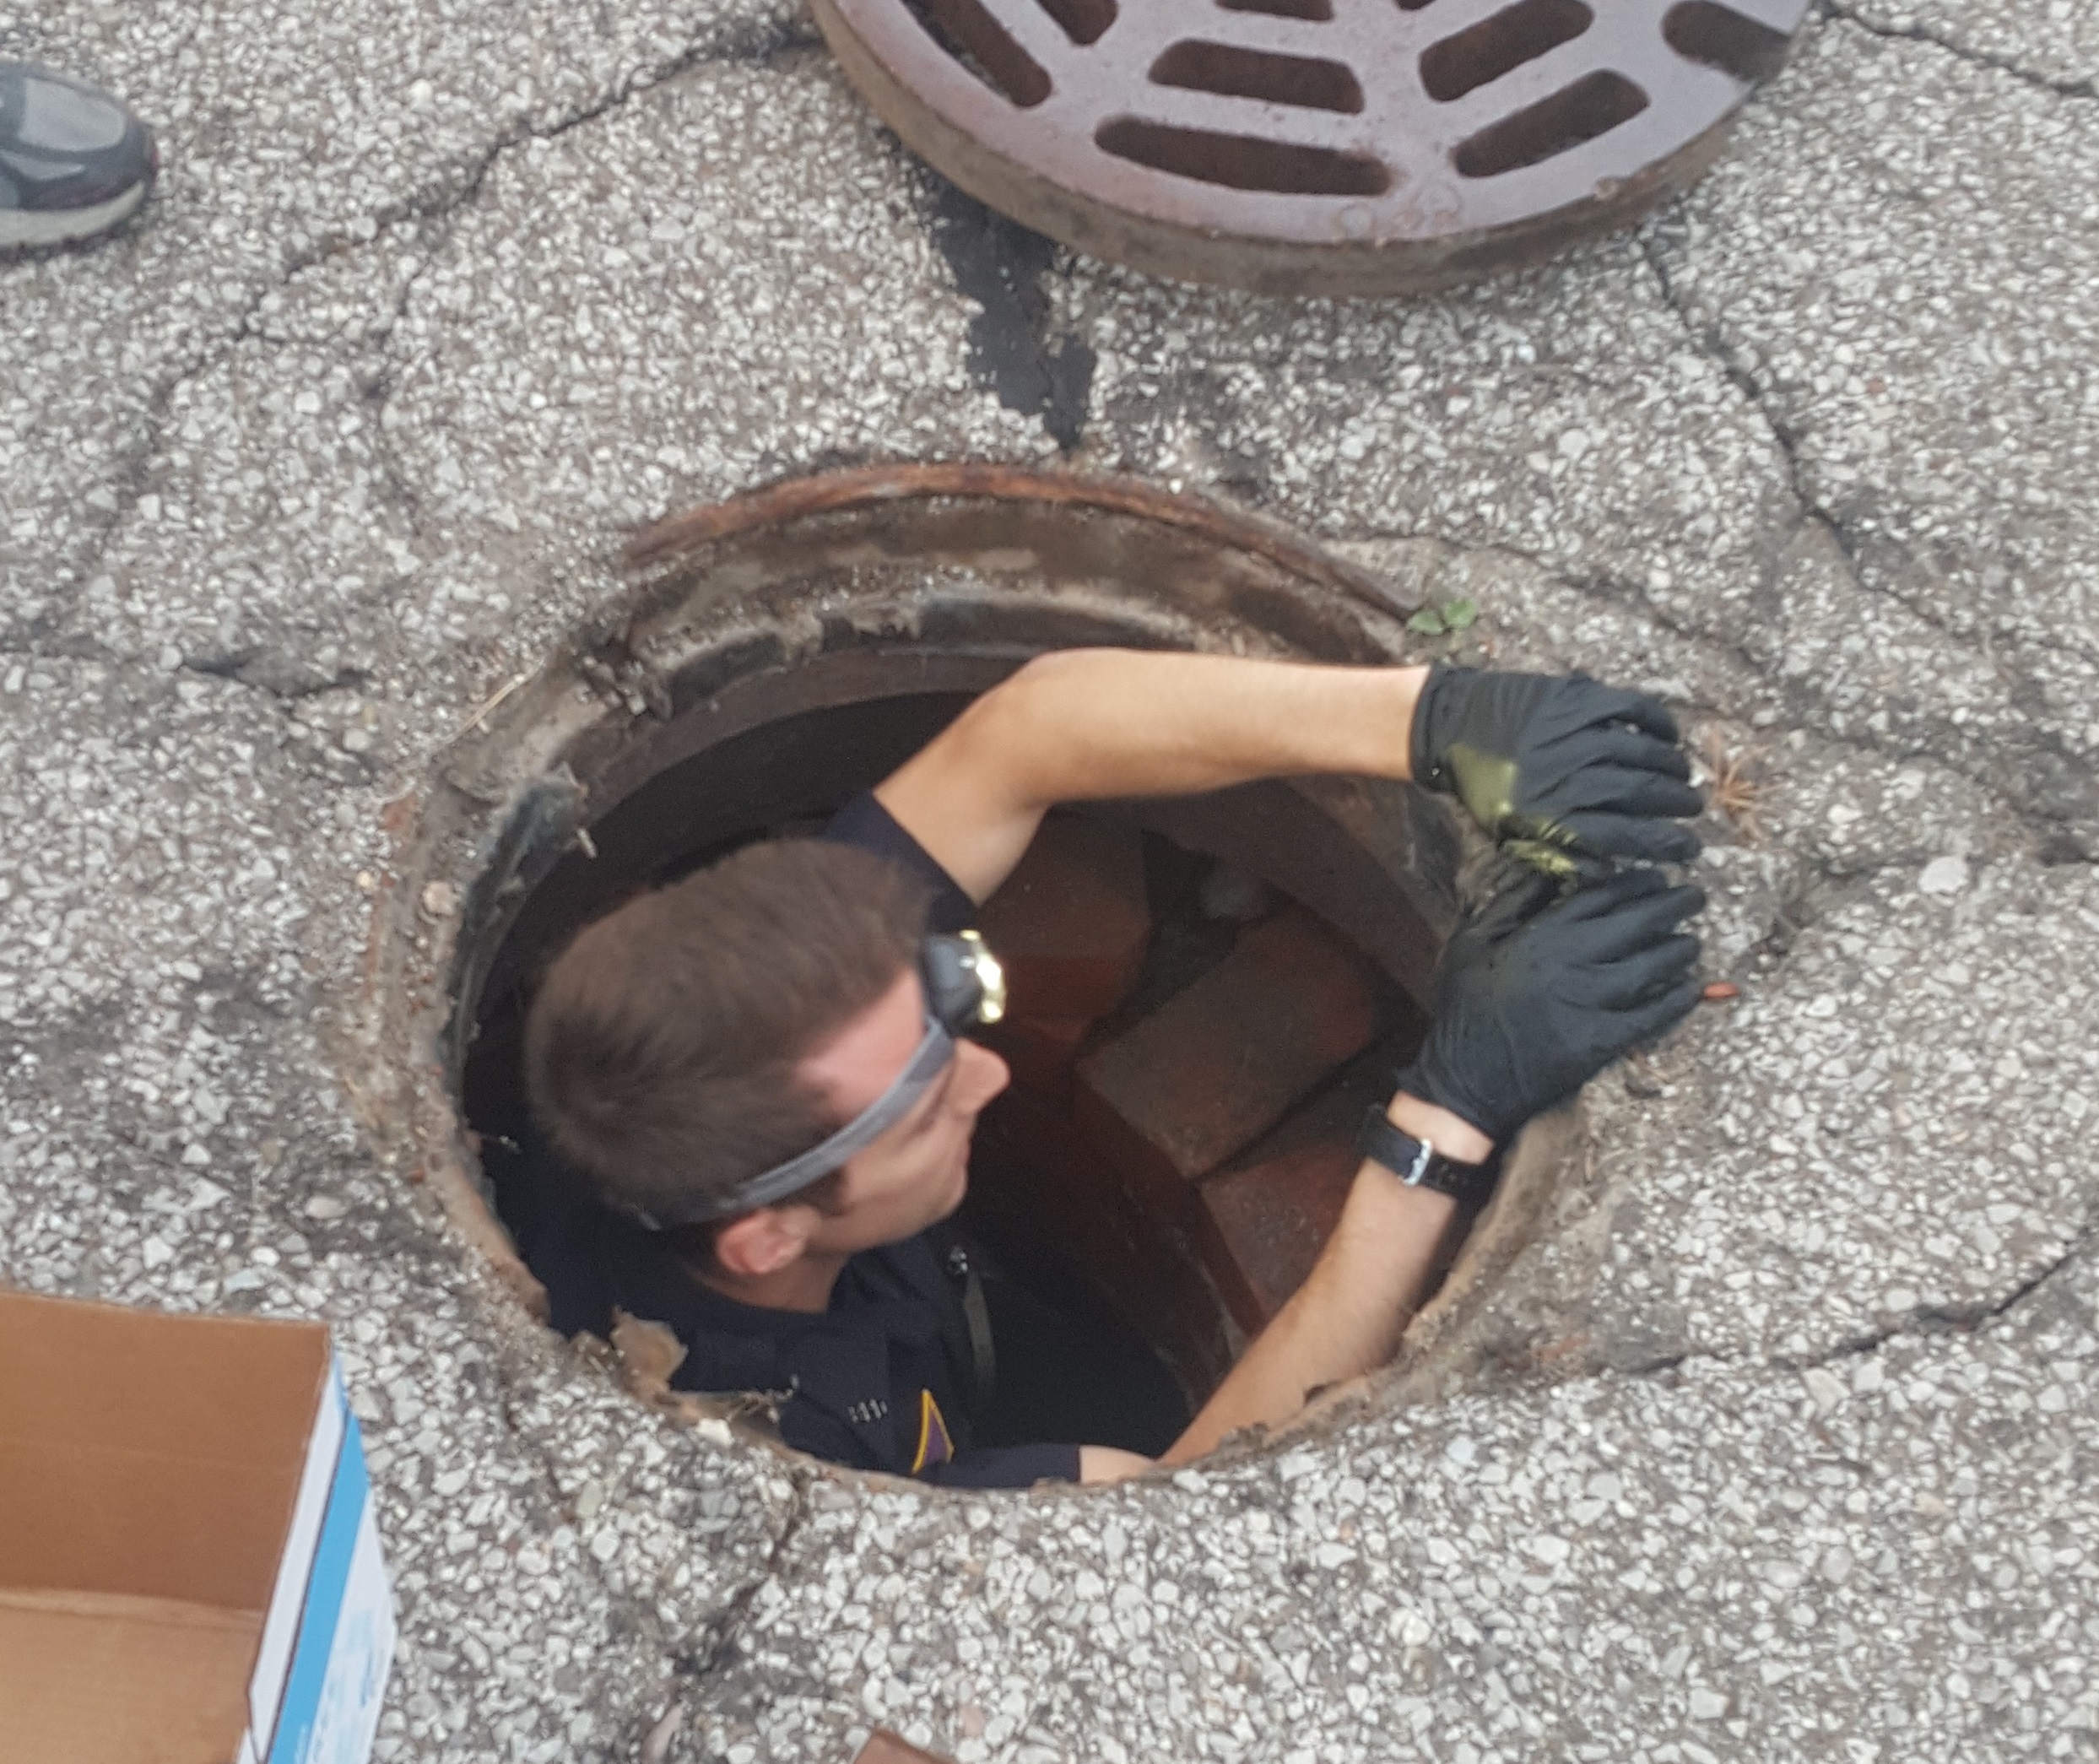 Officer Rescues Ducklings from Sewer